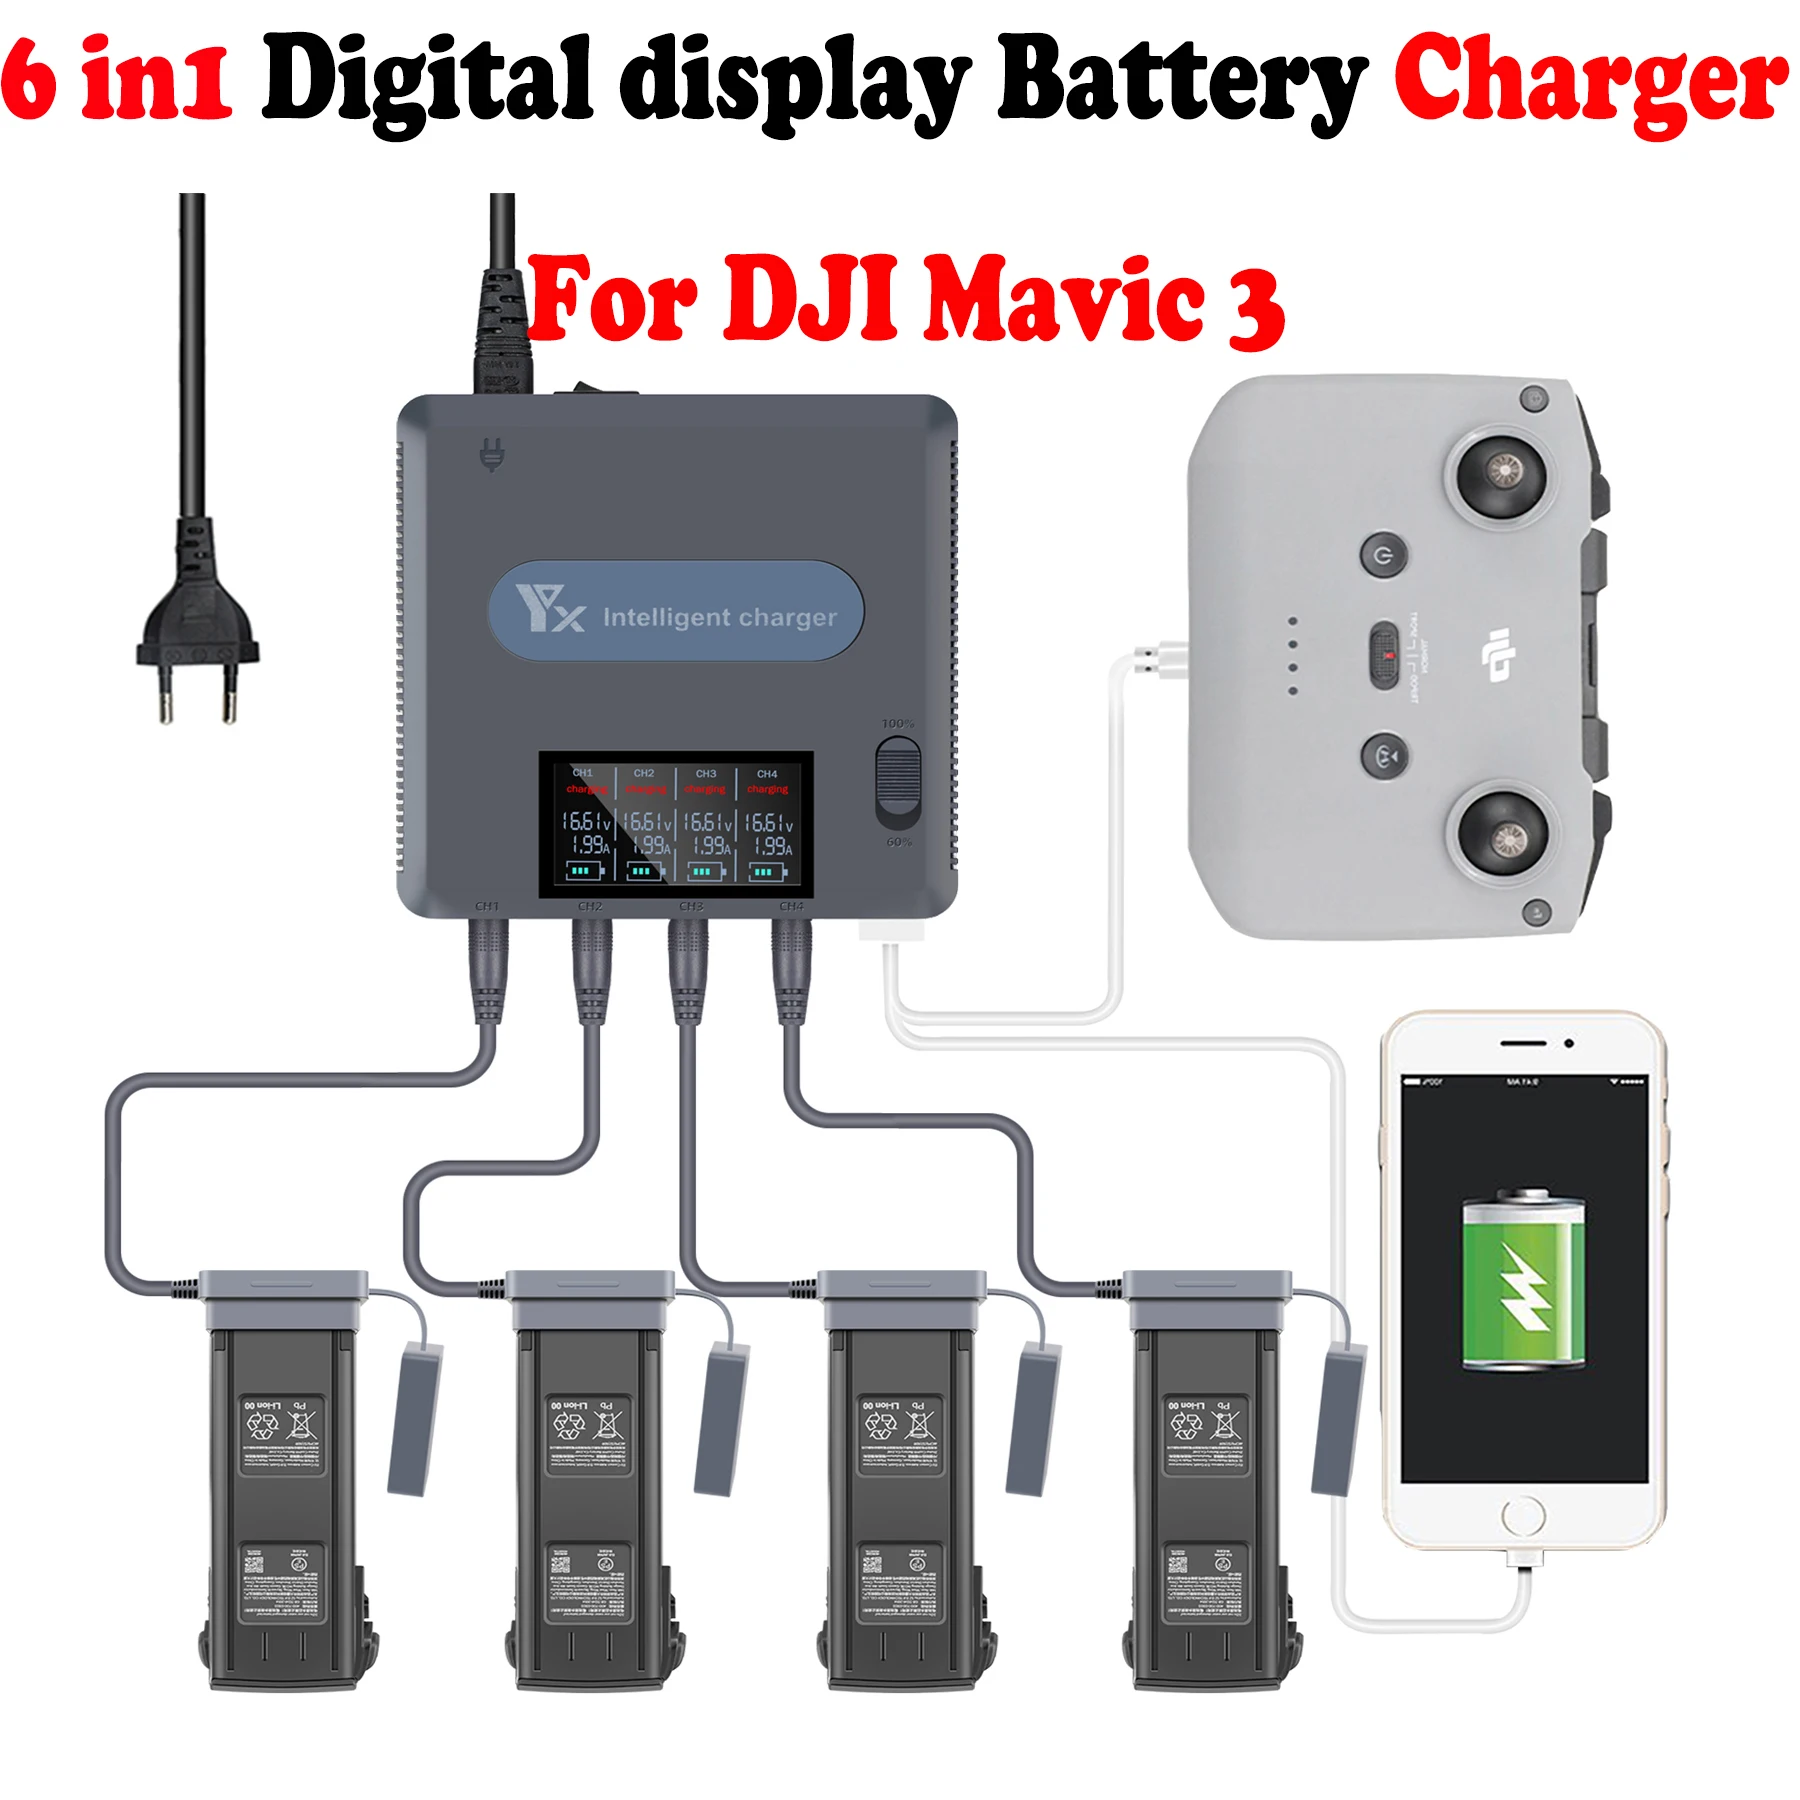 6 in 1 Digital display Battery Charger for DJI Mavic 3 Drone Battery Charging Hub Fast Smart Battery Charger with USB Hub adapte